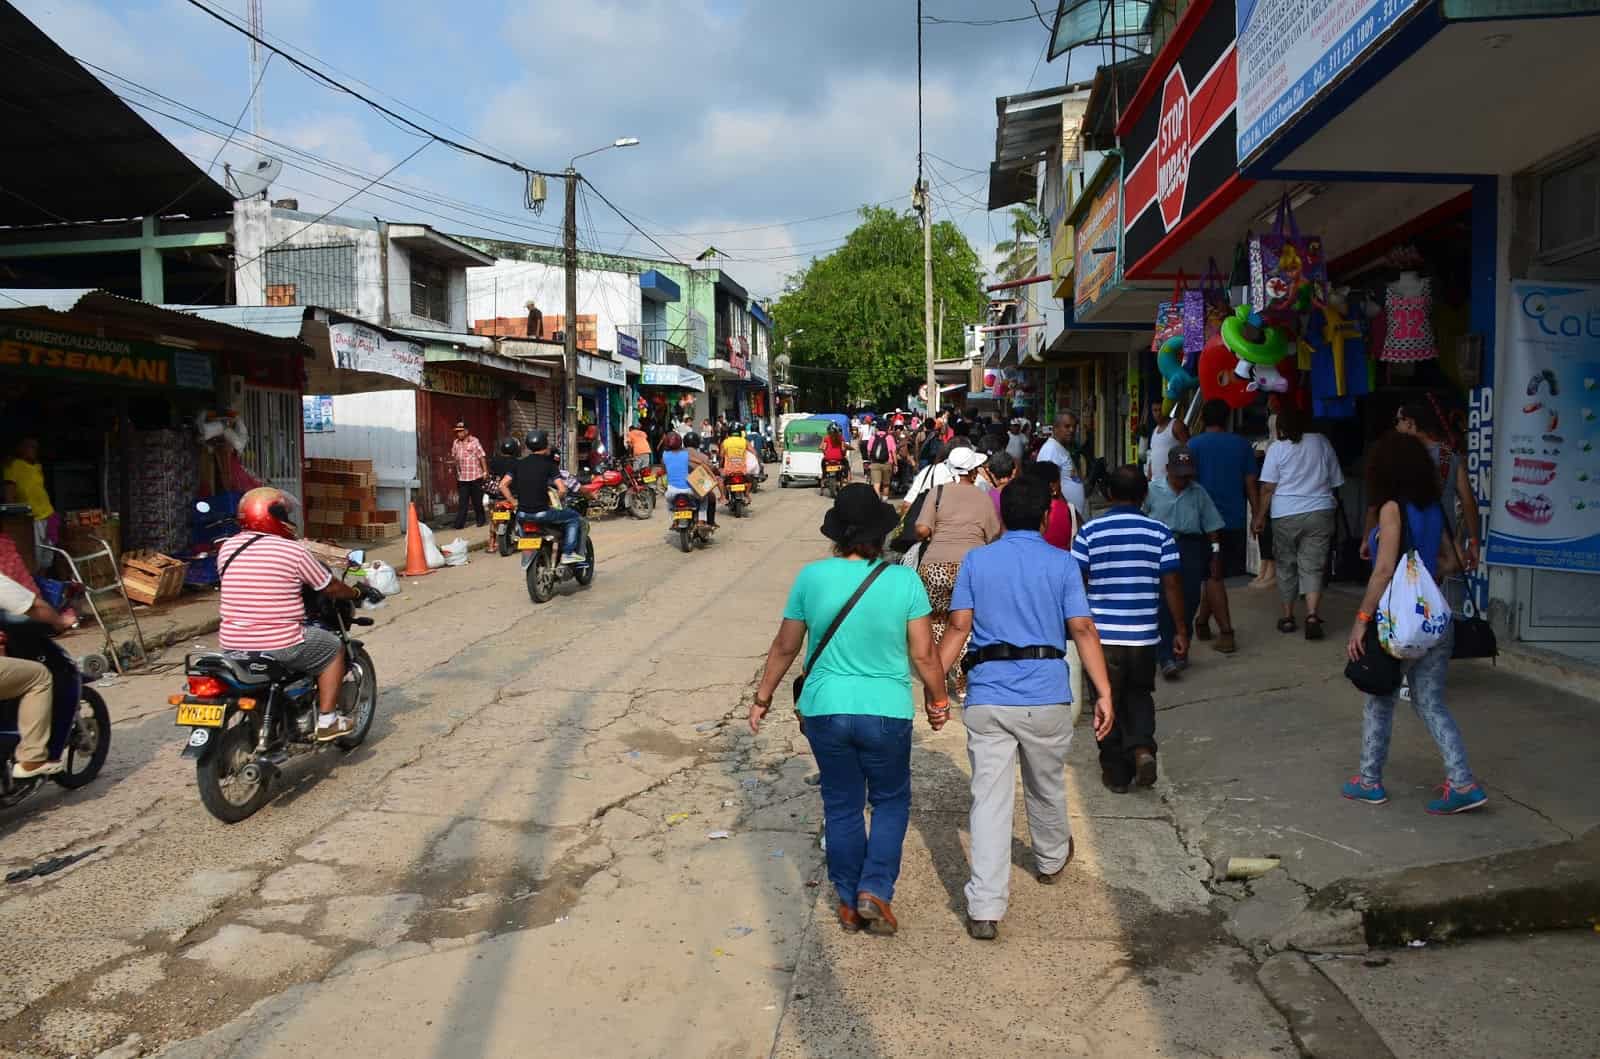 Street in Leticia Amazonas Colombia